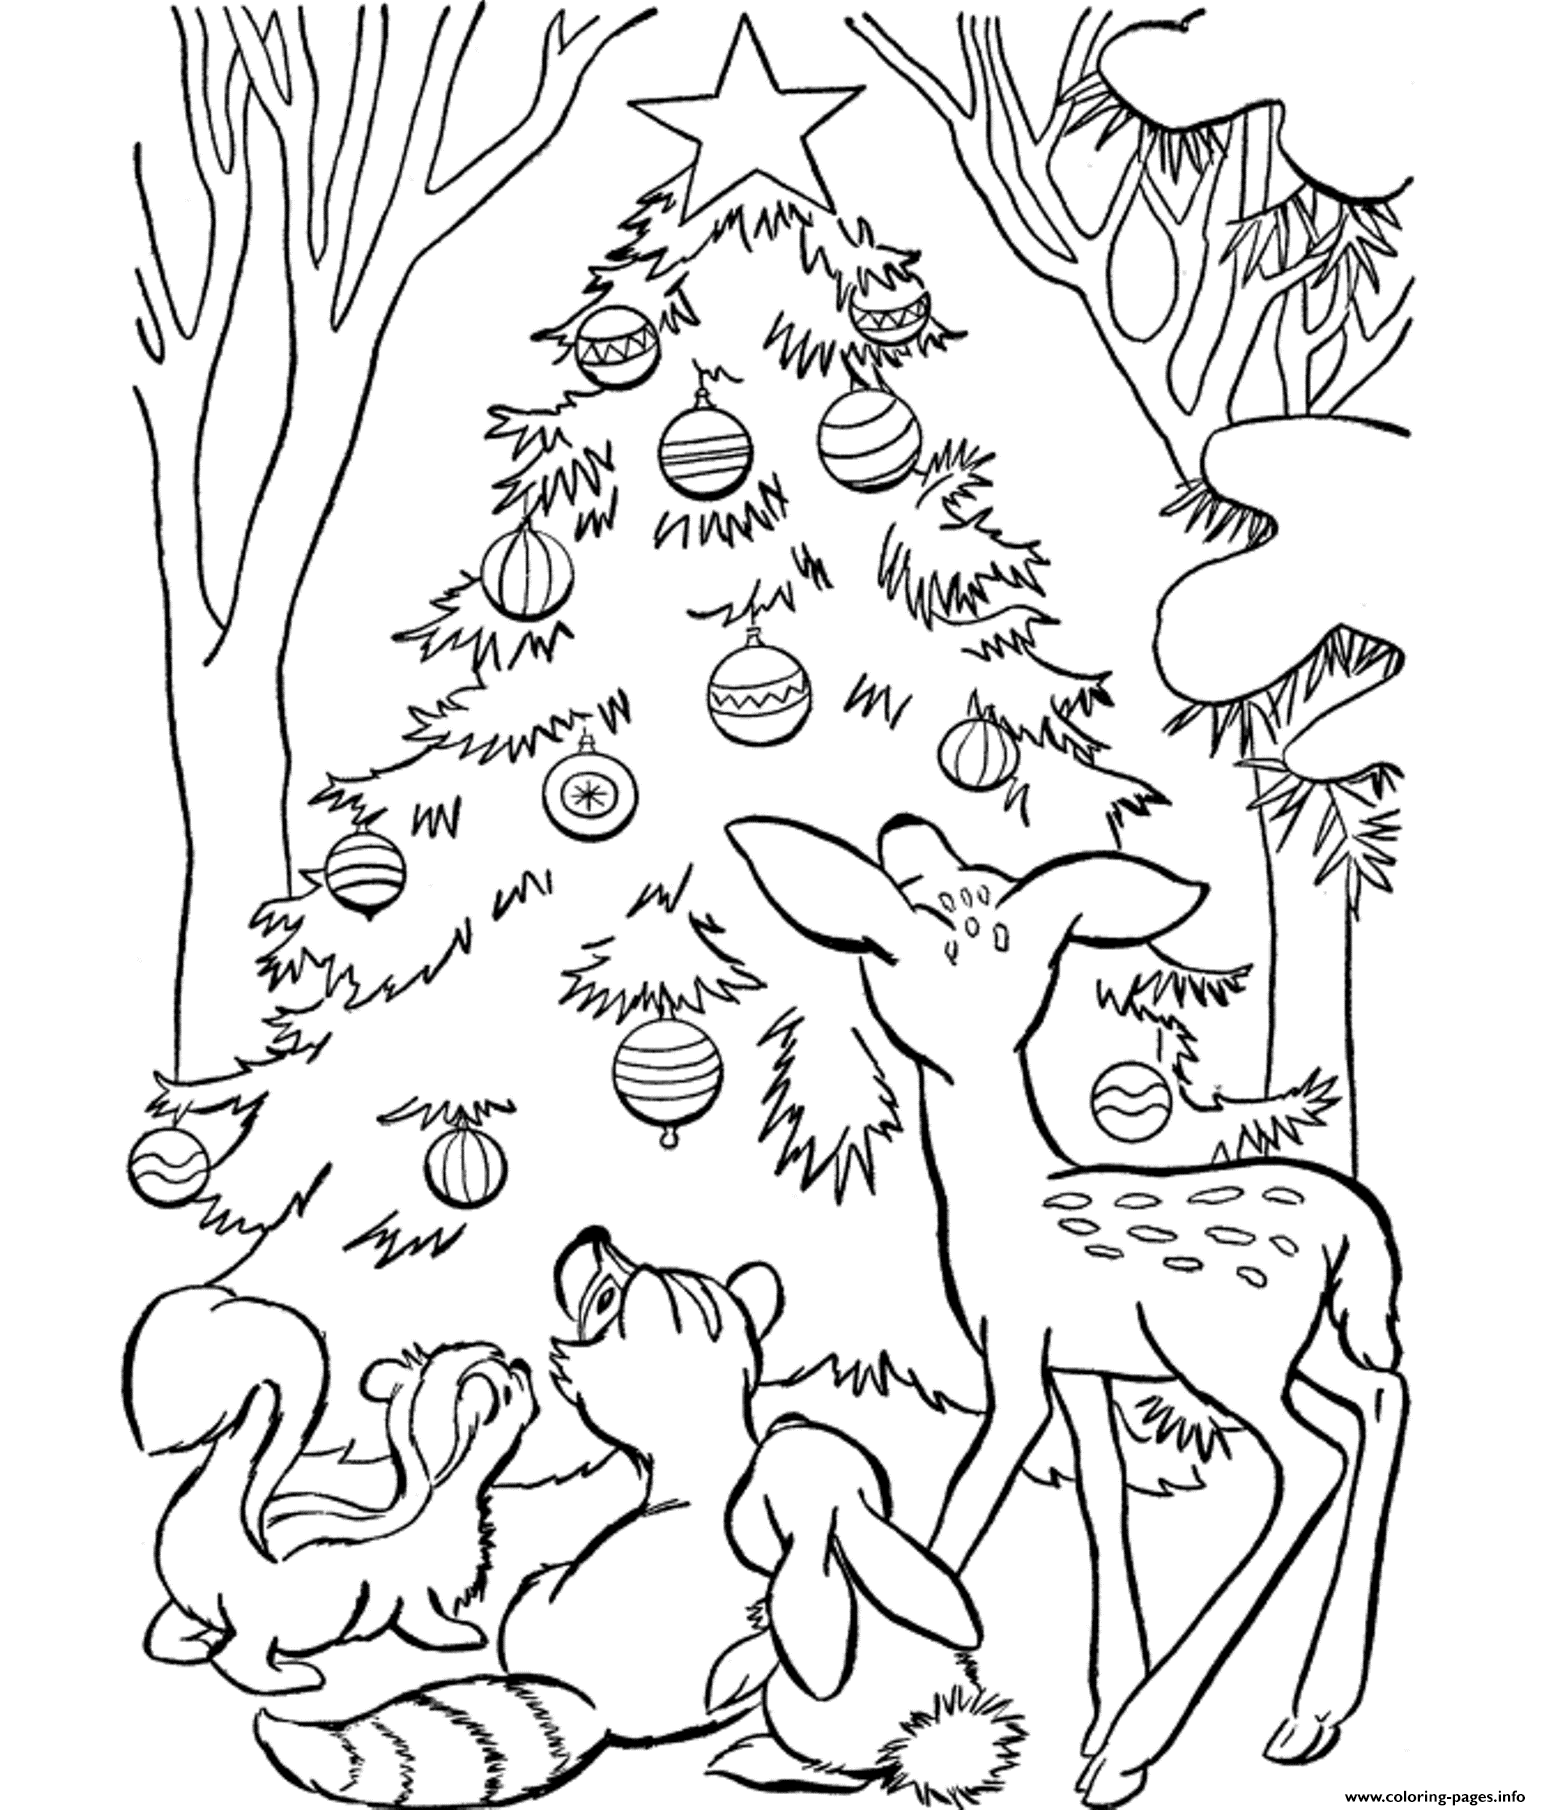 Coloring Pages For Christmas Tree3be5 coloring